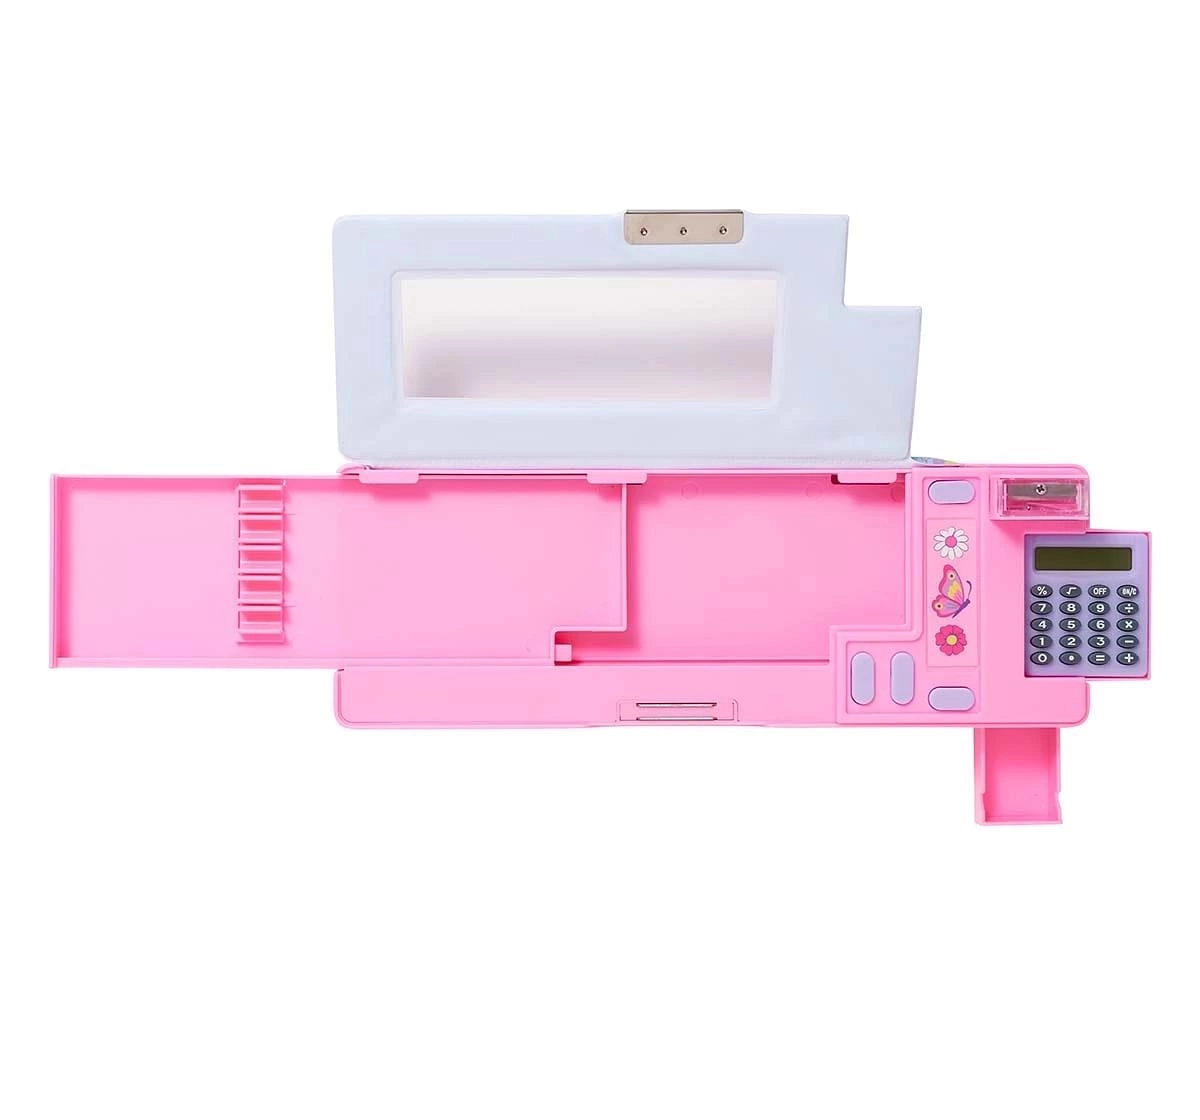 Smiggle Hey There Collection Pencil Case Pop Out Pink, 4Y+